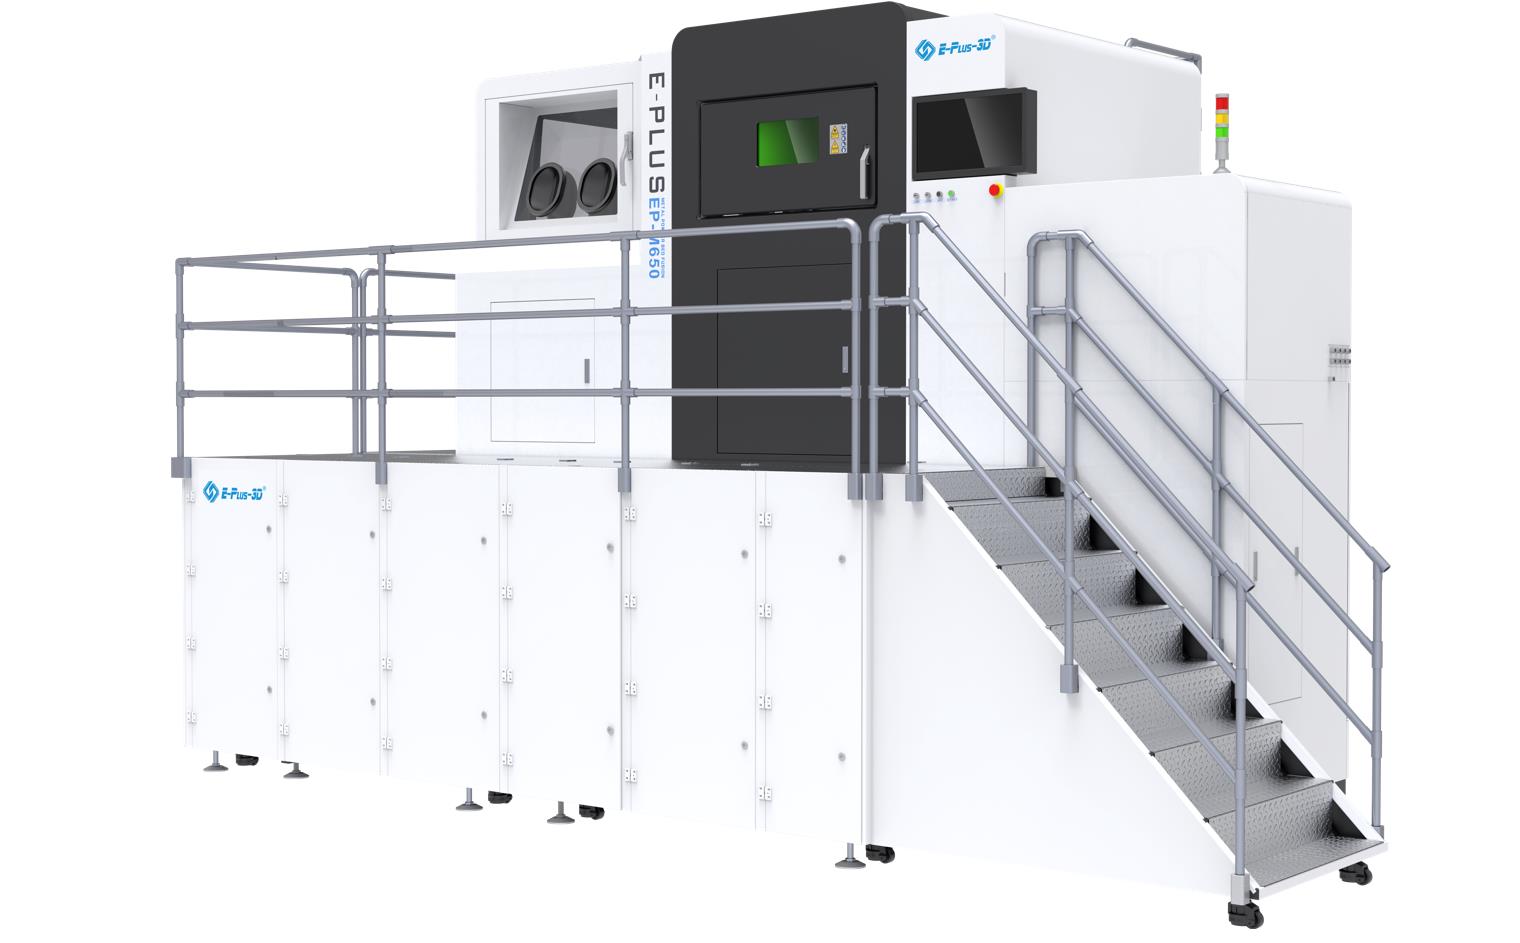 EPLUS 3D Enters into Railway Industry with Large-format Metal AM Machines